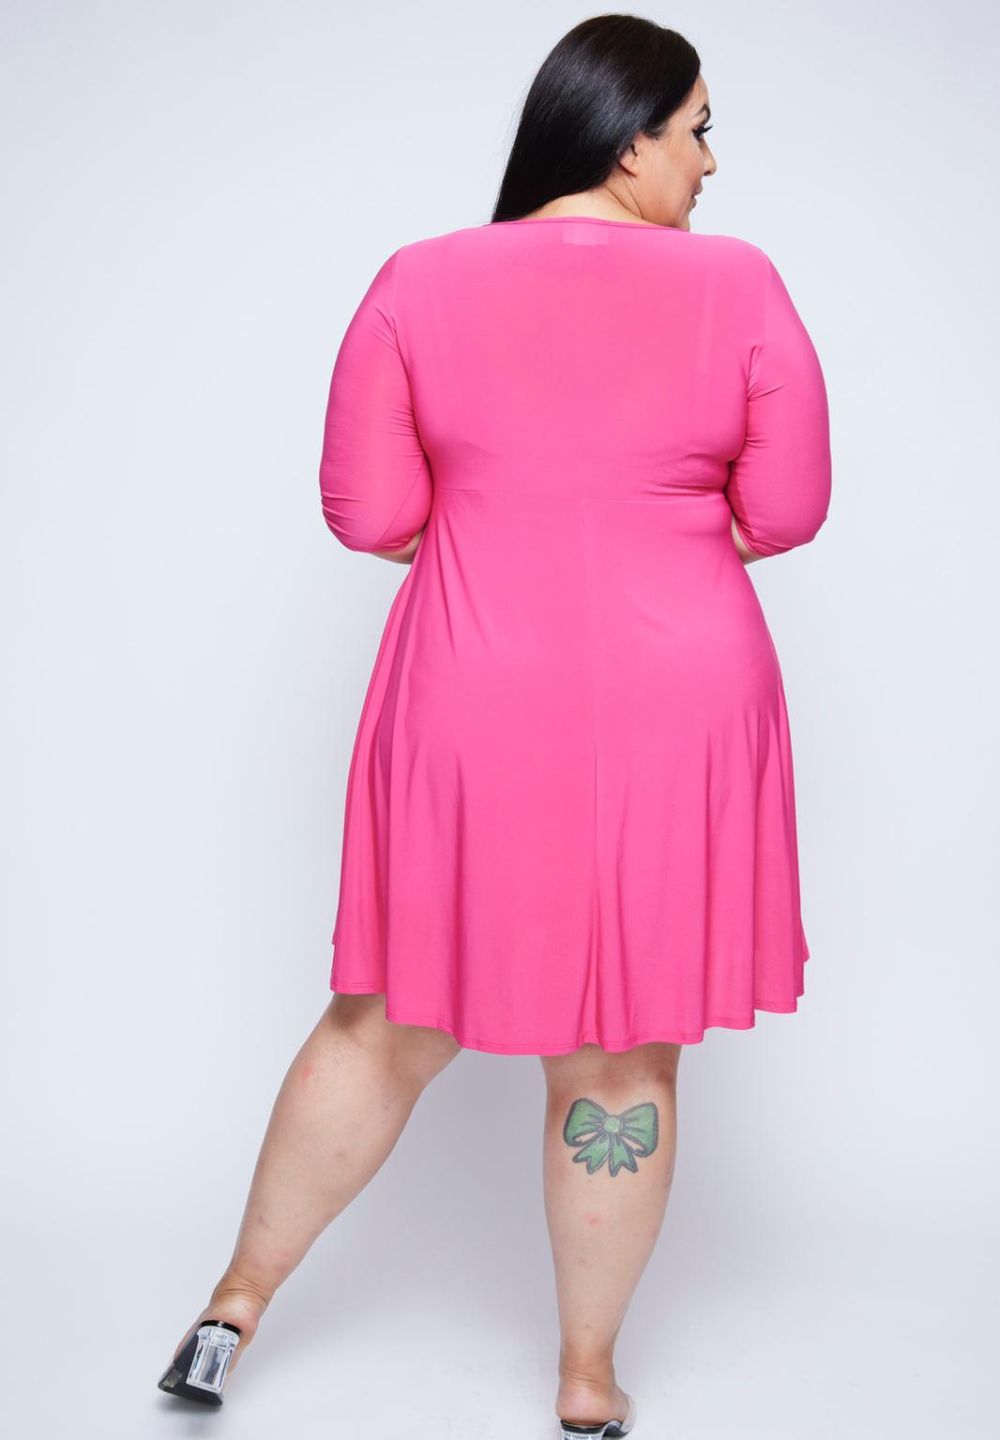 Hot Pink Plus Size Dress, Pink Plus Size Outfits